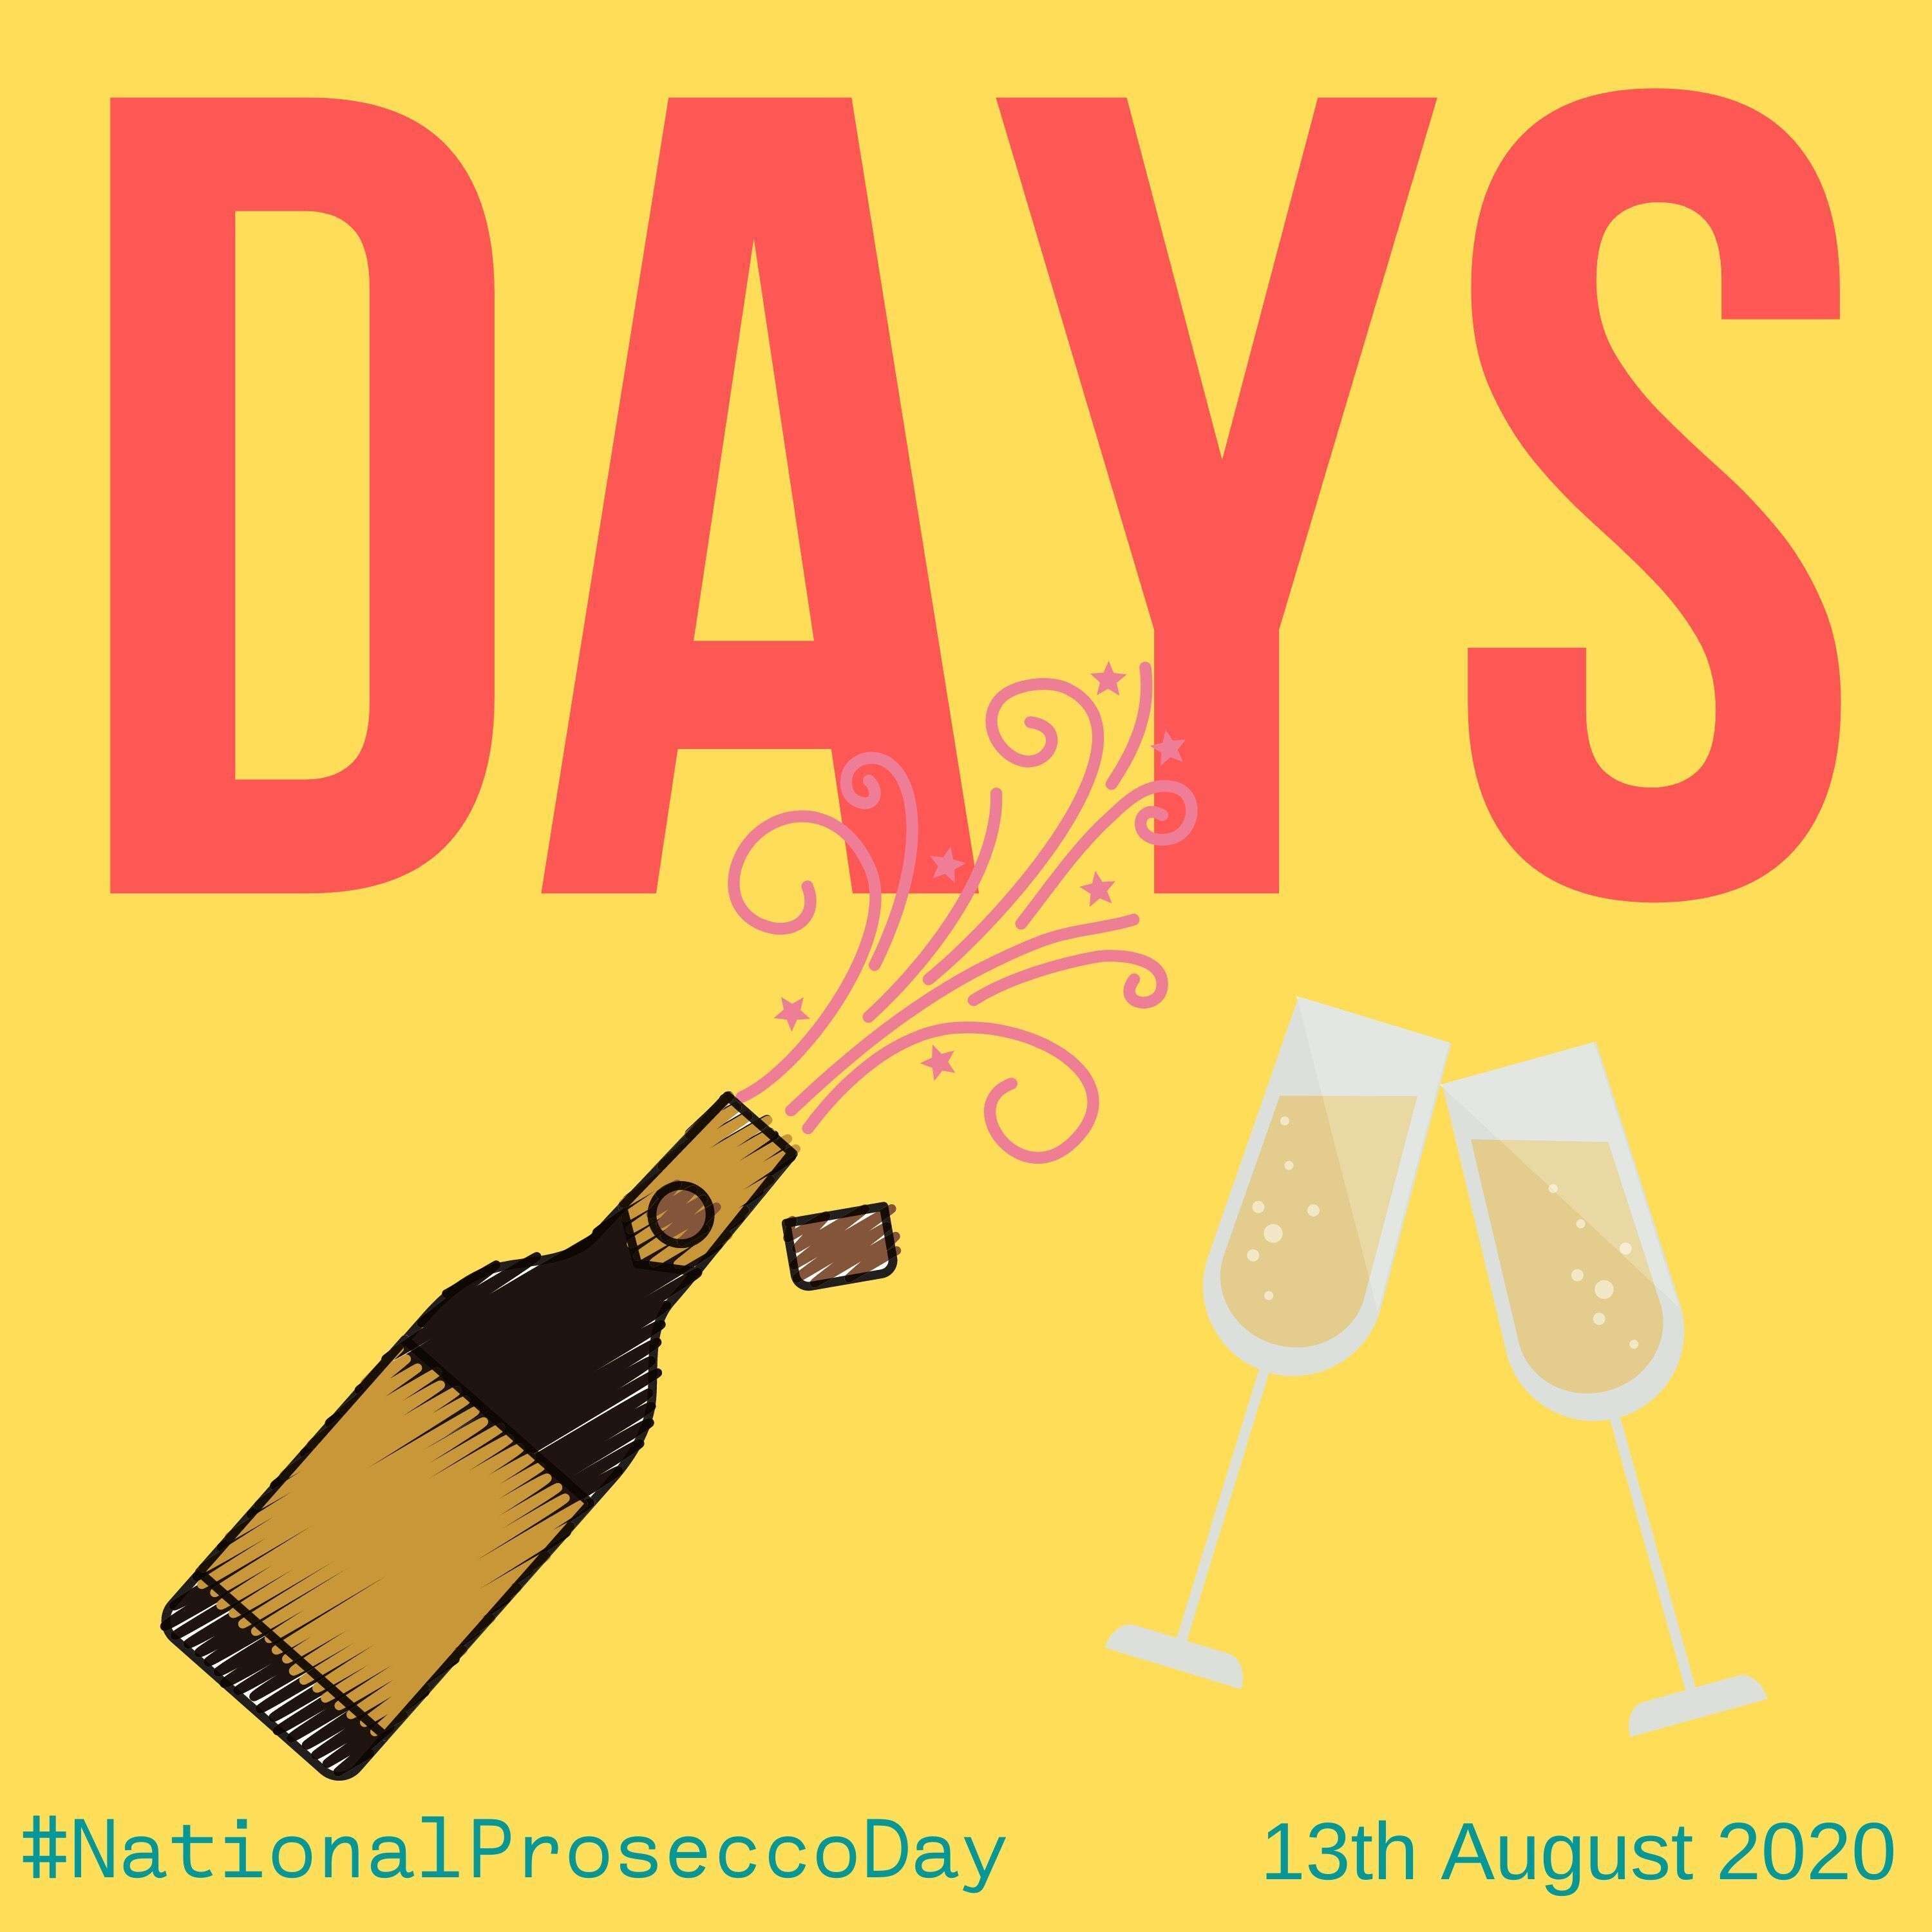 National Prosecco Day - 13th August 2020